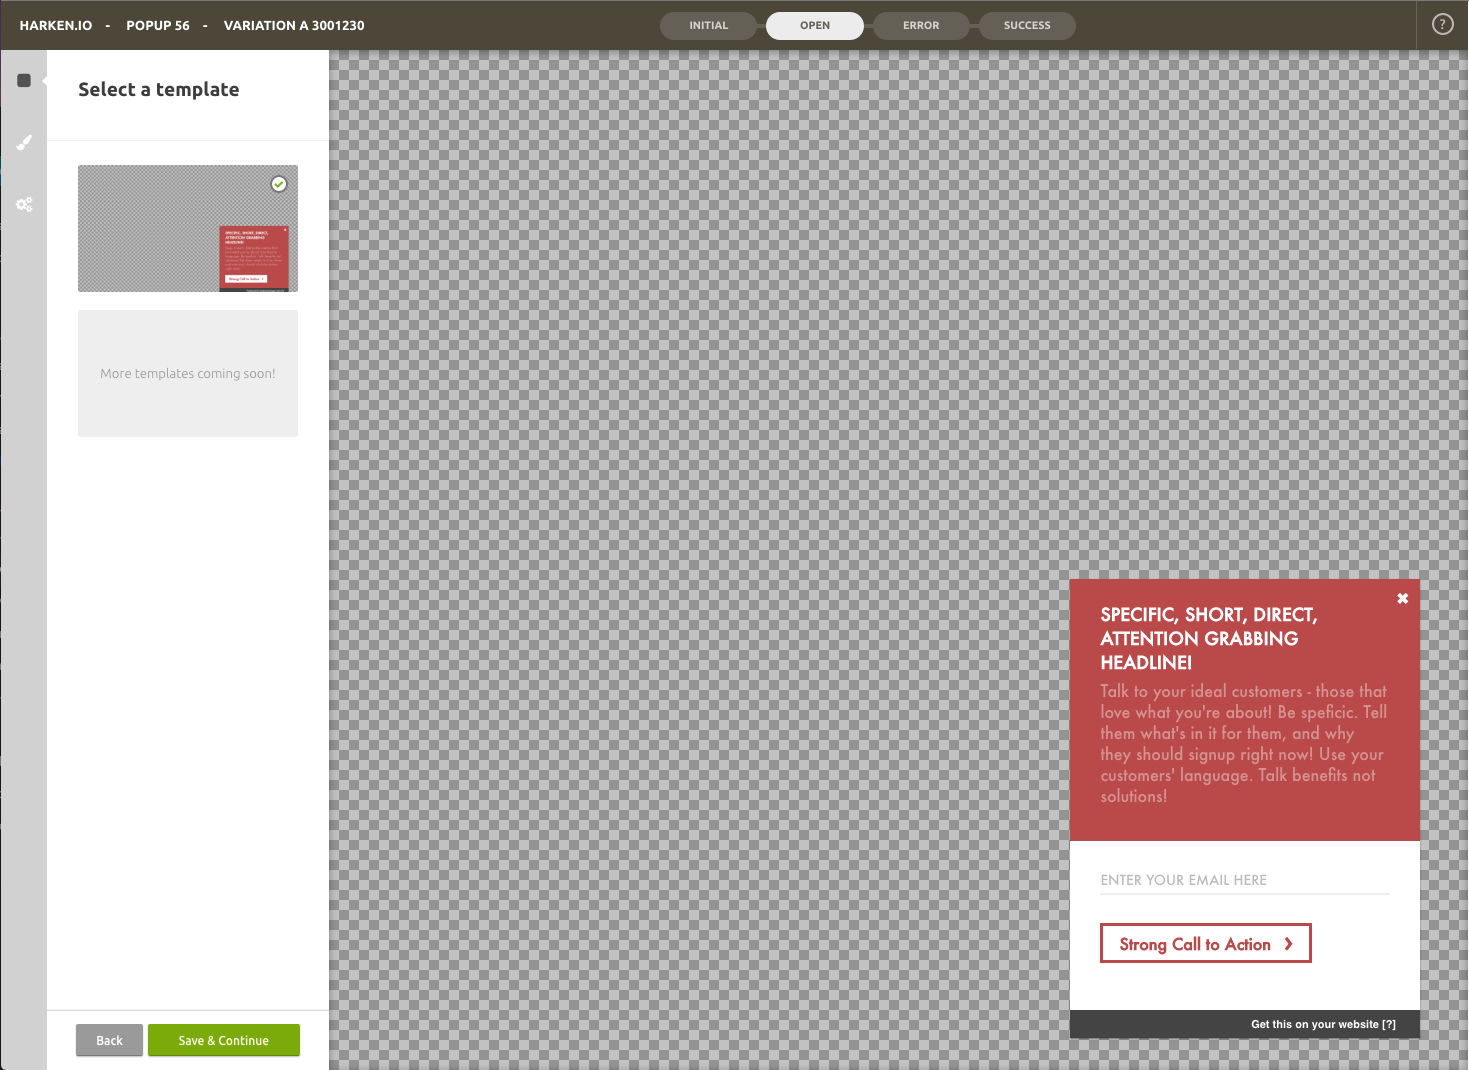 Configuring the initial stage of a full page overlay popup.